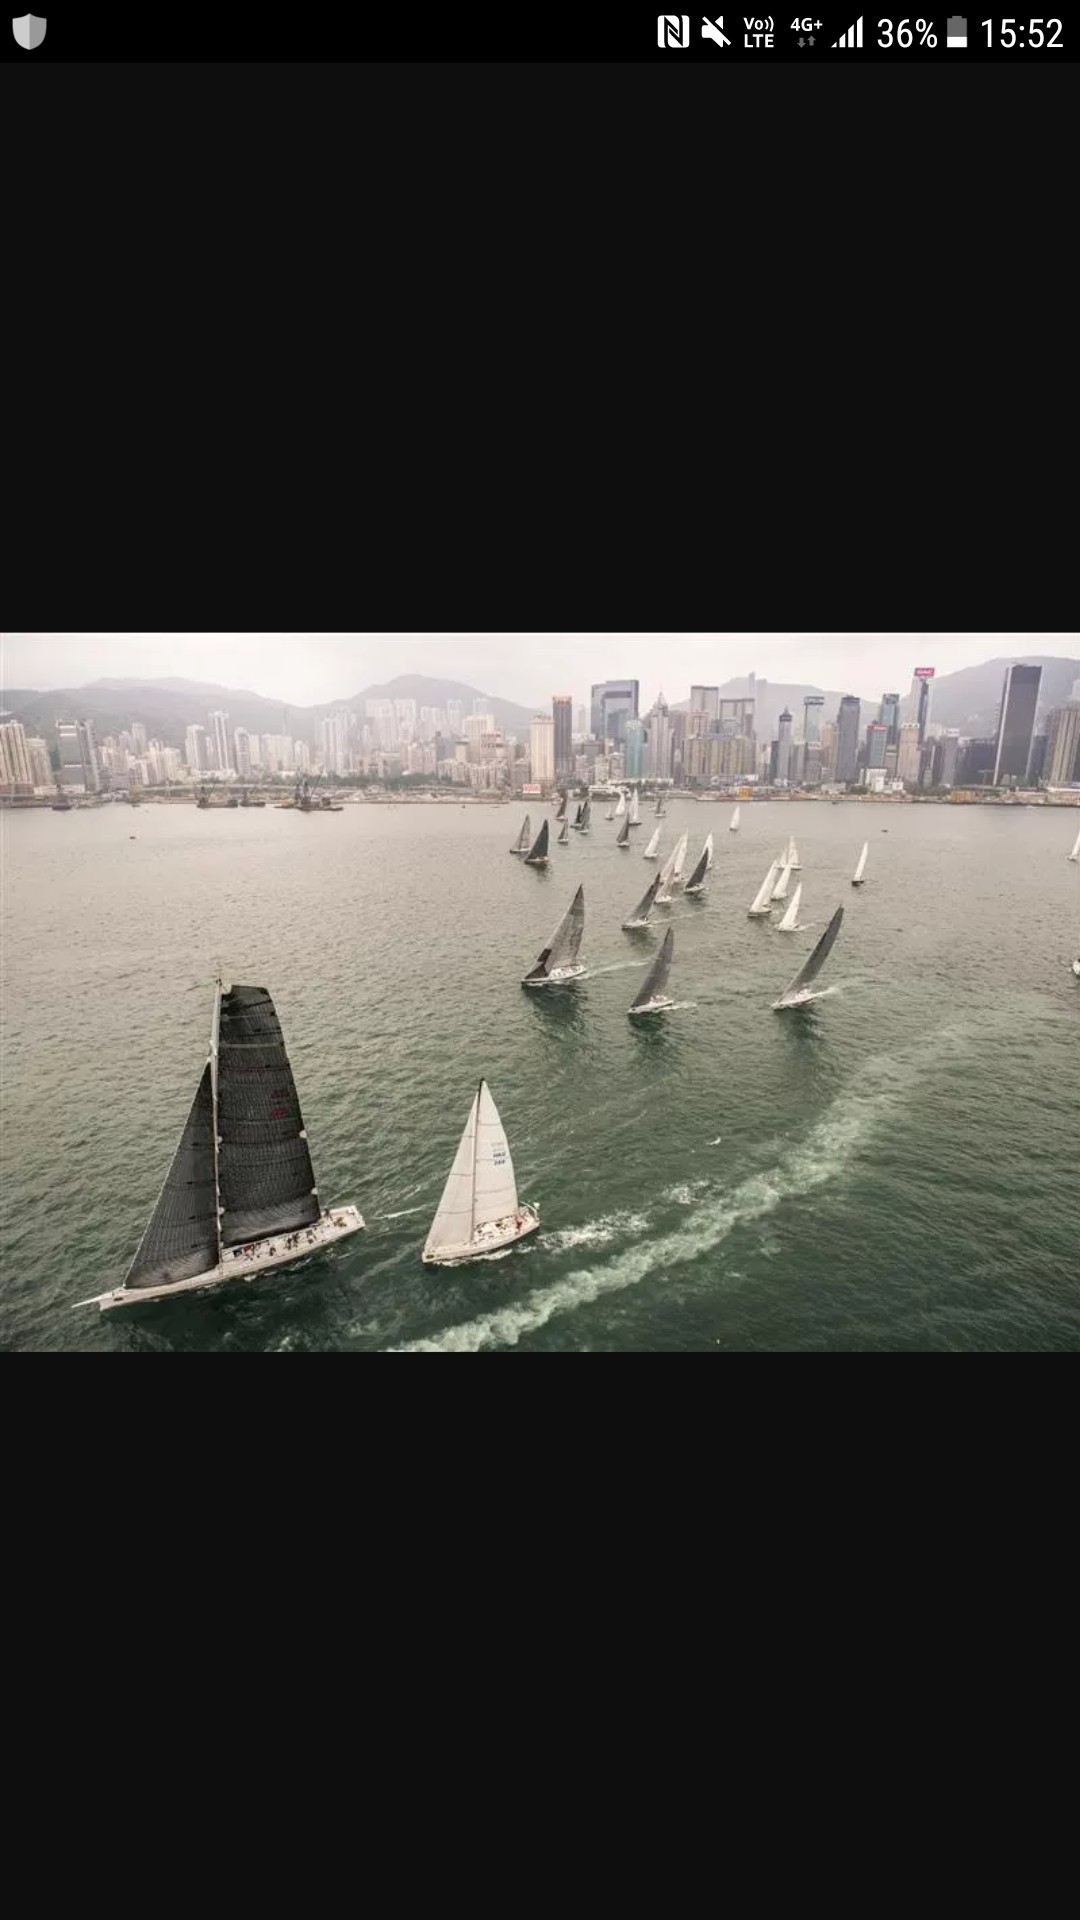 Hanse 575 Shanghai team using Wechat social platform to help recruit sailors, who are seeking adventure in next year’s Asian blue-water classic from Hong Kong to Subic Bay in the Philippines